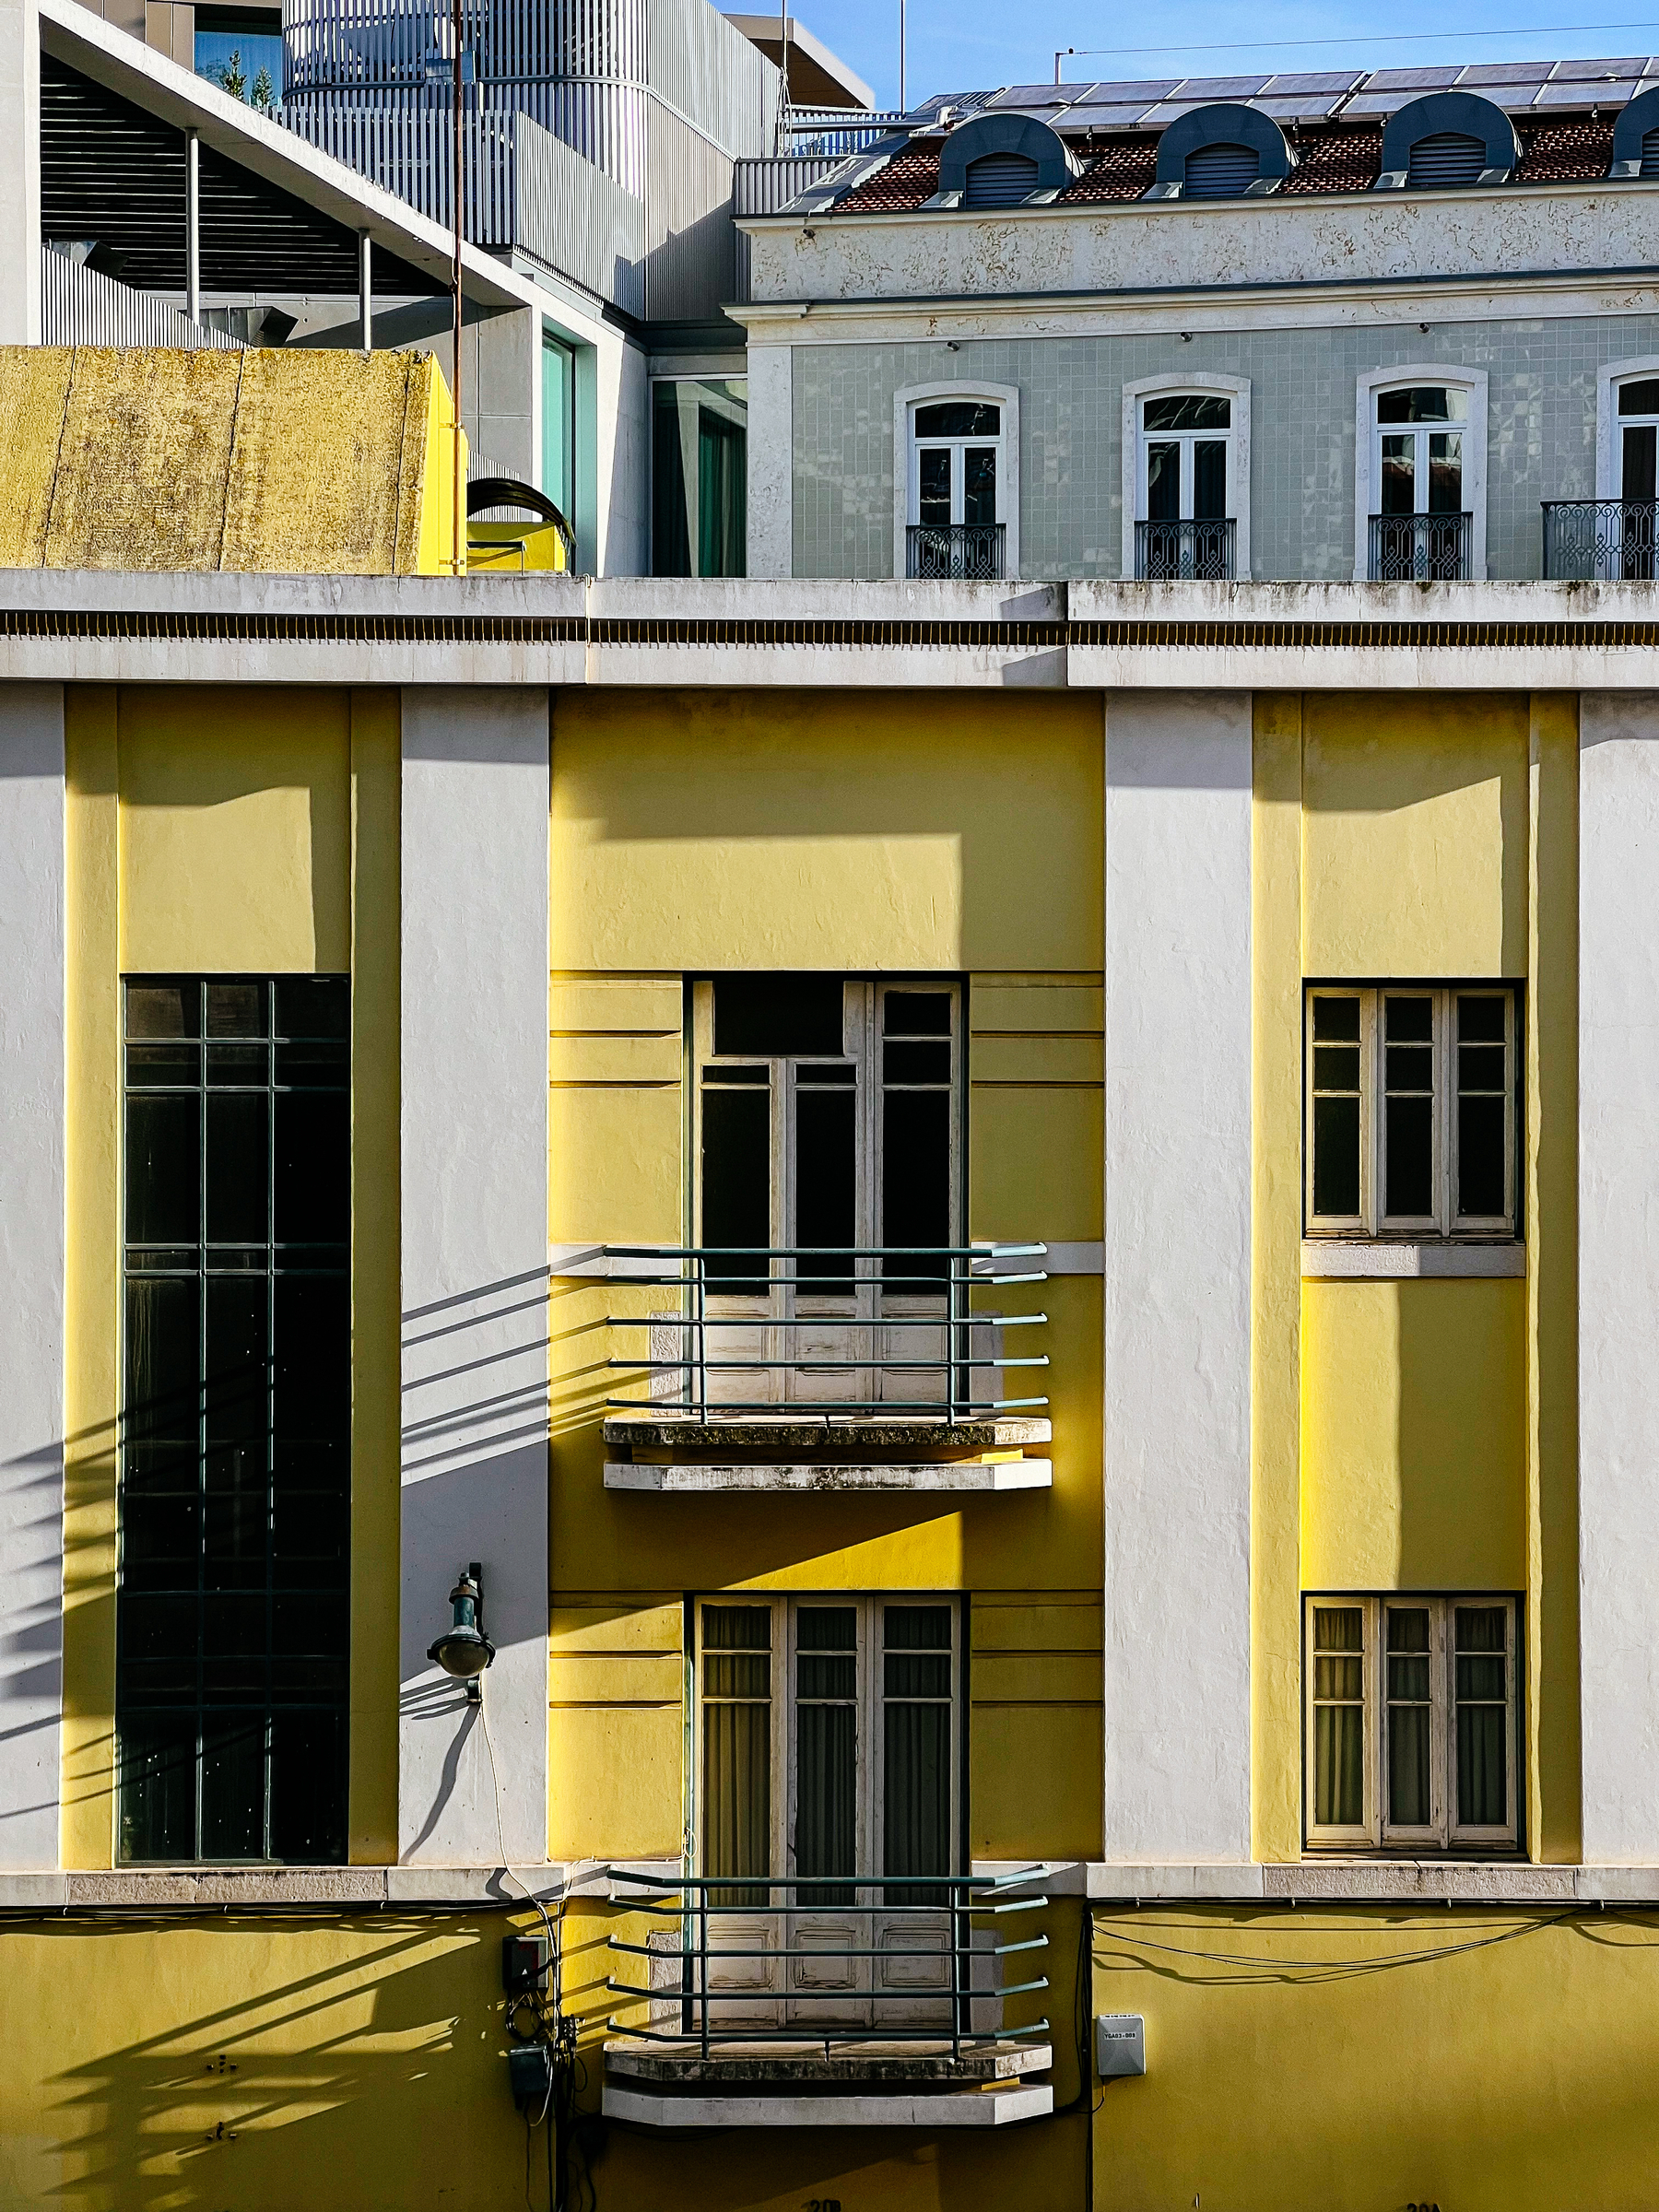 A building facade with a contrasting architectural styles, featuring a yellow section with balconies and shadows cast on the walls, adjacent to a white building with classic windows and a rooftop terrace.